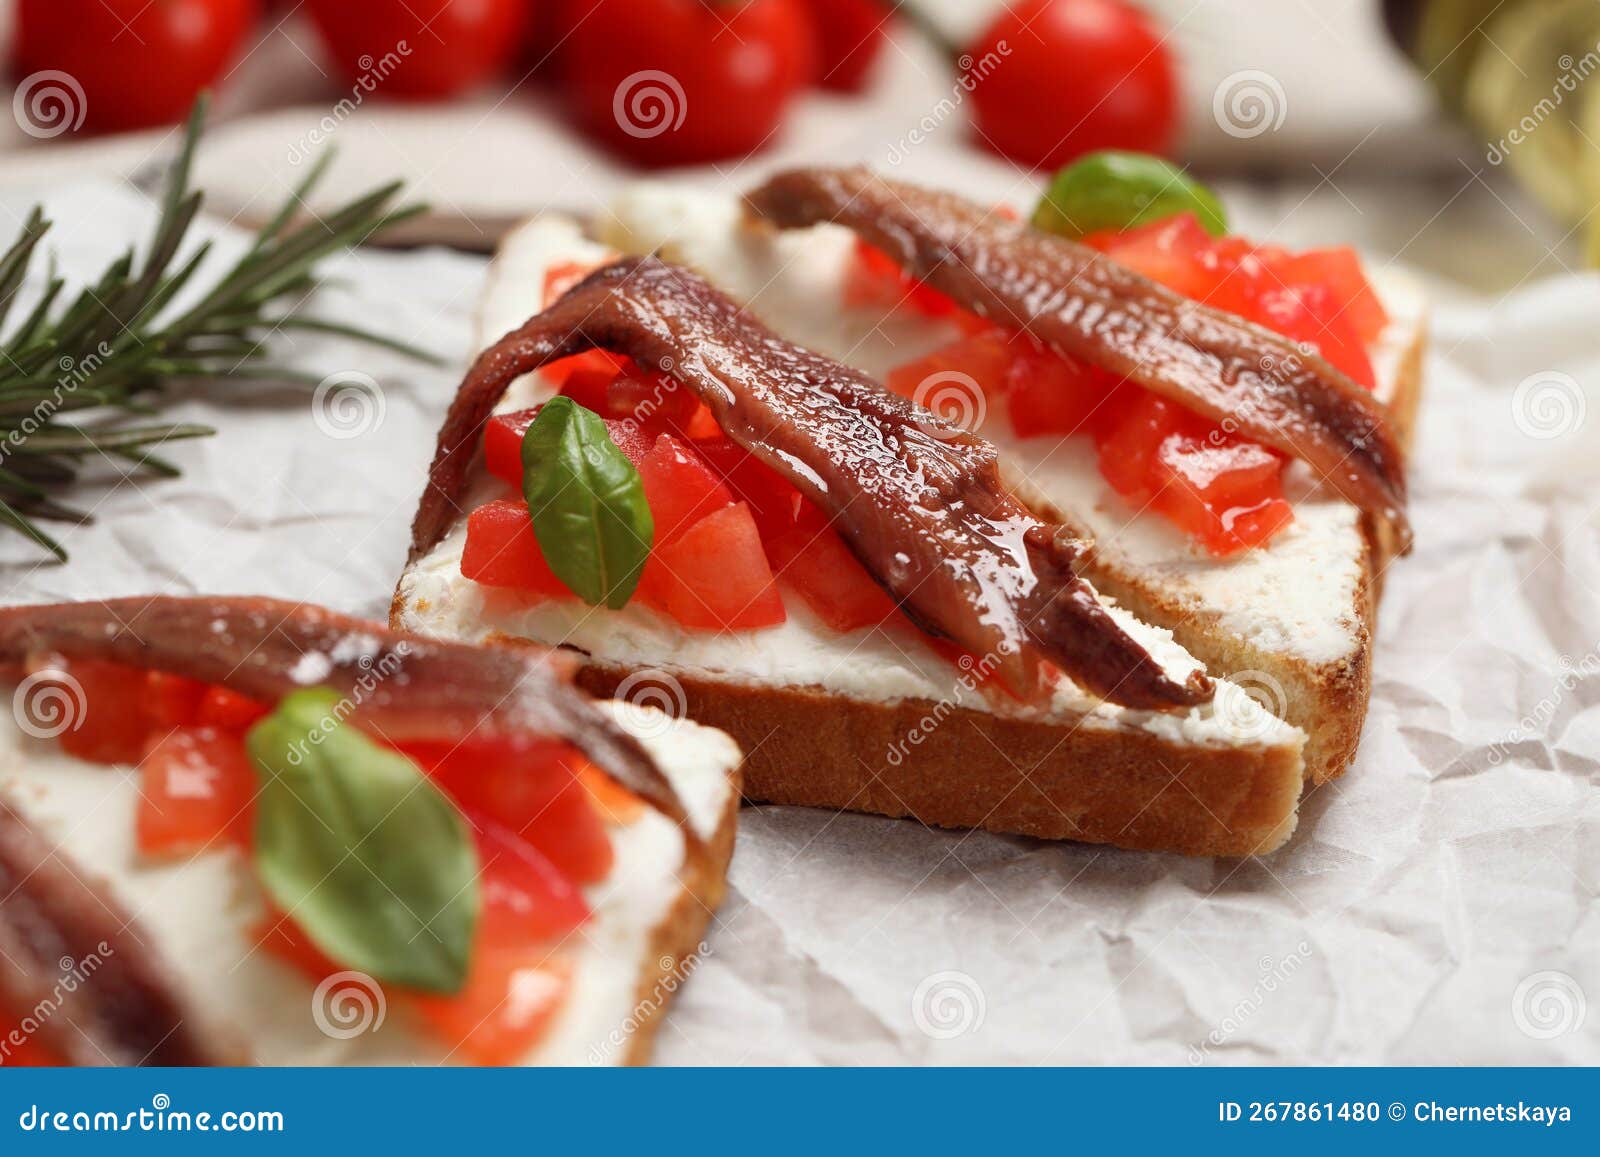 Delicious Sandwiches with Cream Cheese, Anchovies, Tomatoes and Basil ...